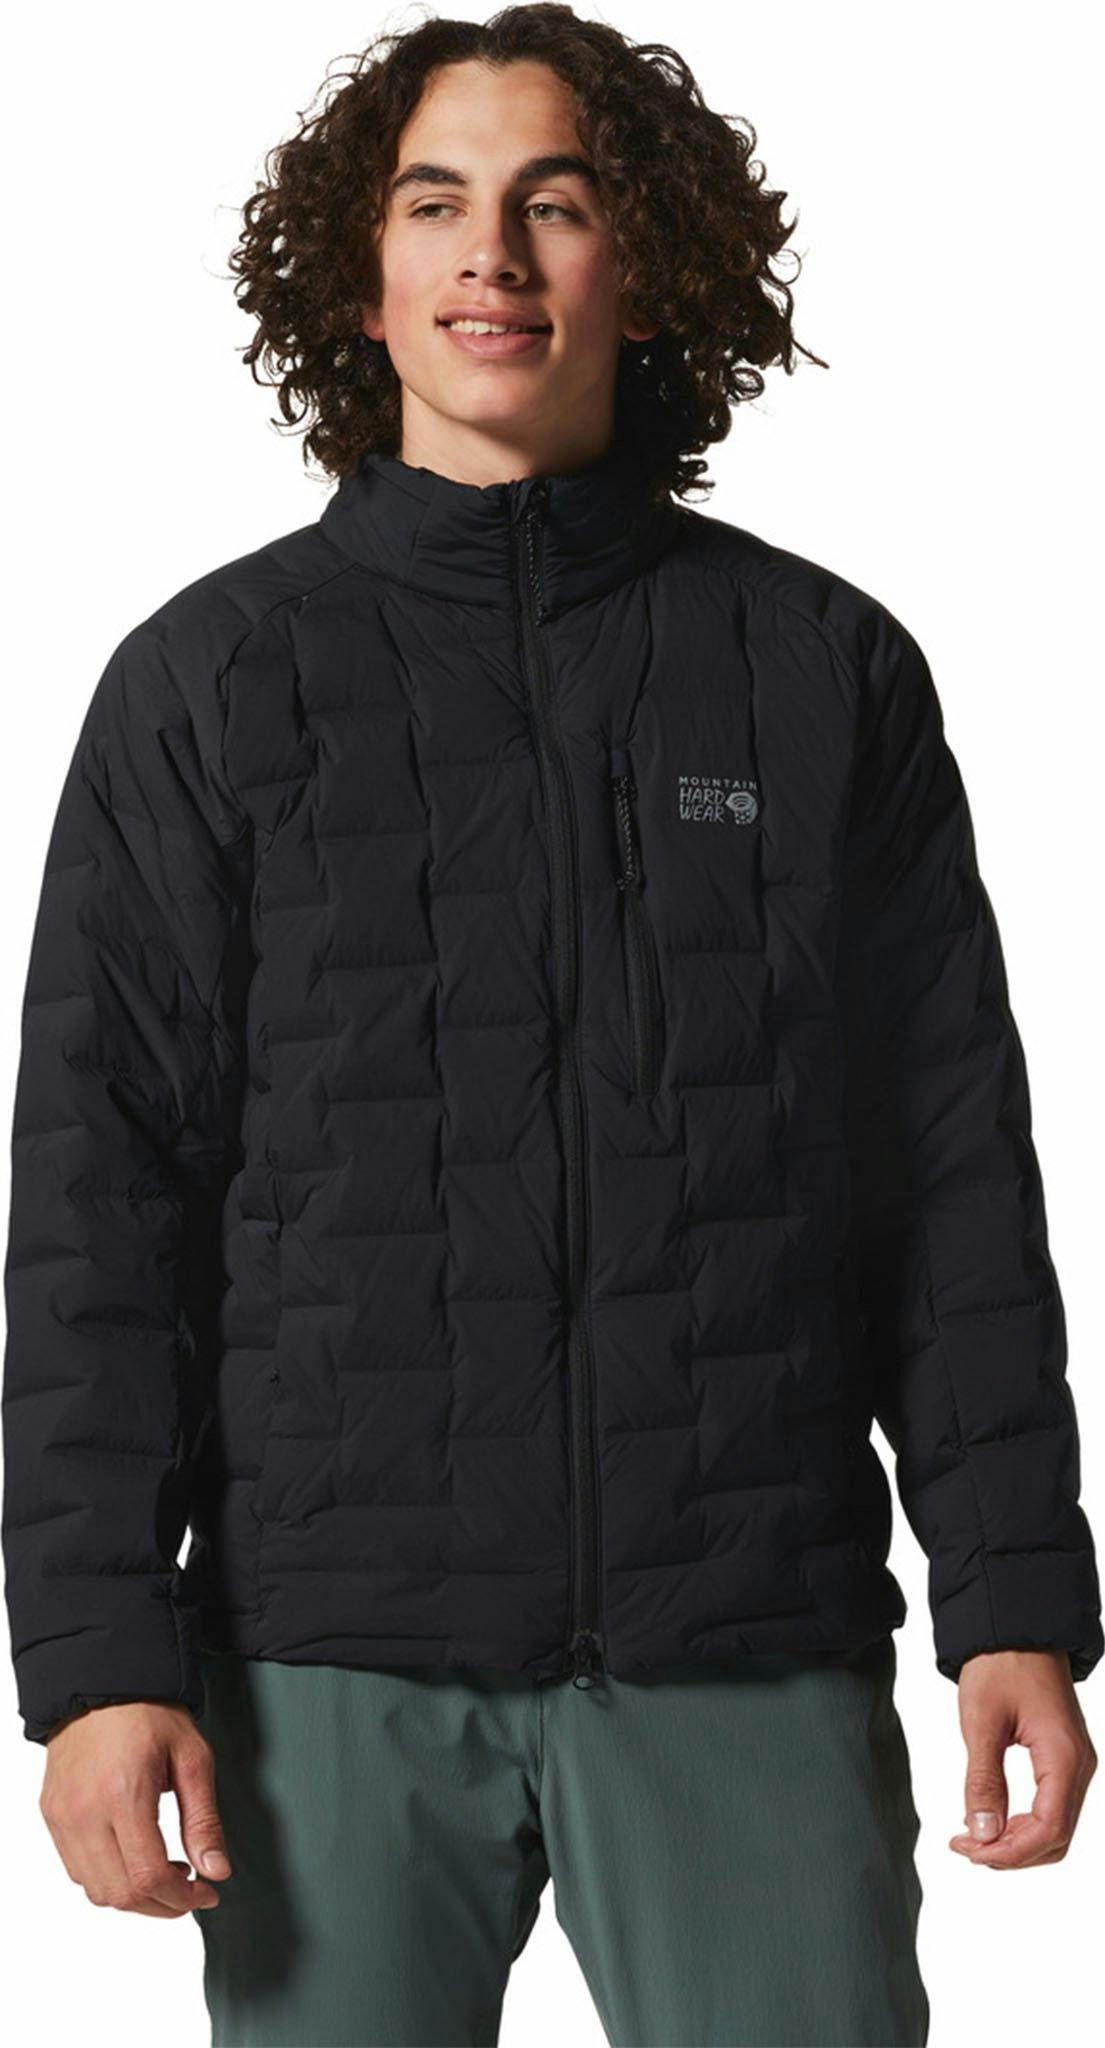 Product image for Stretchdown™ Jacket - Men's